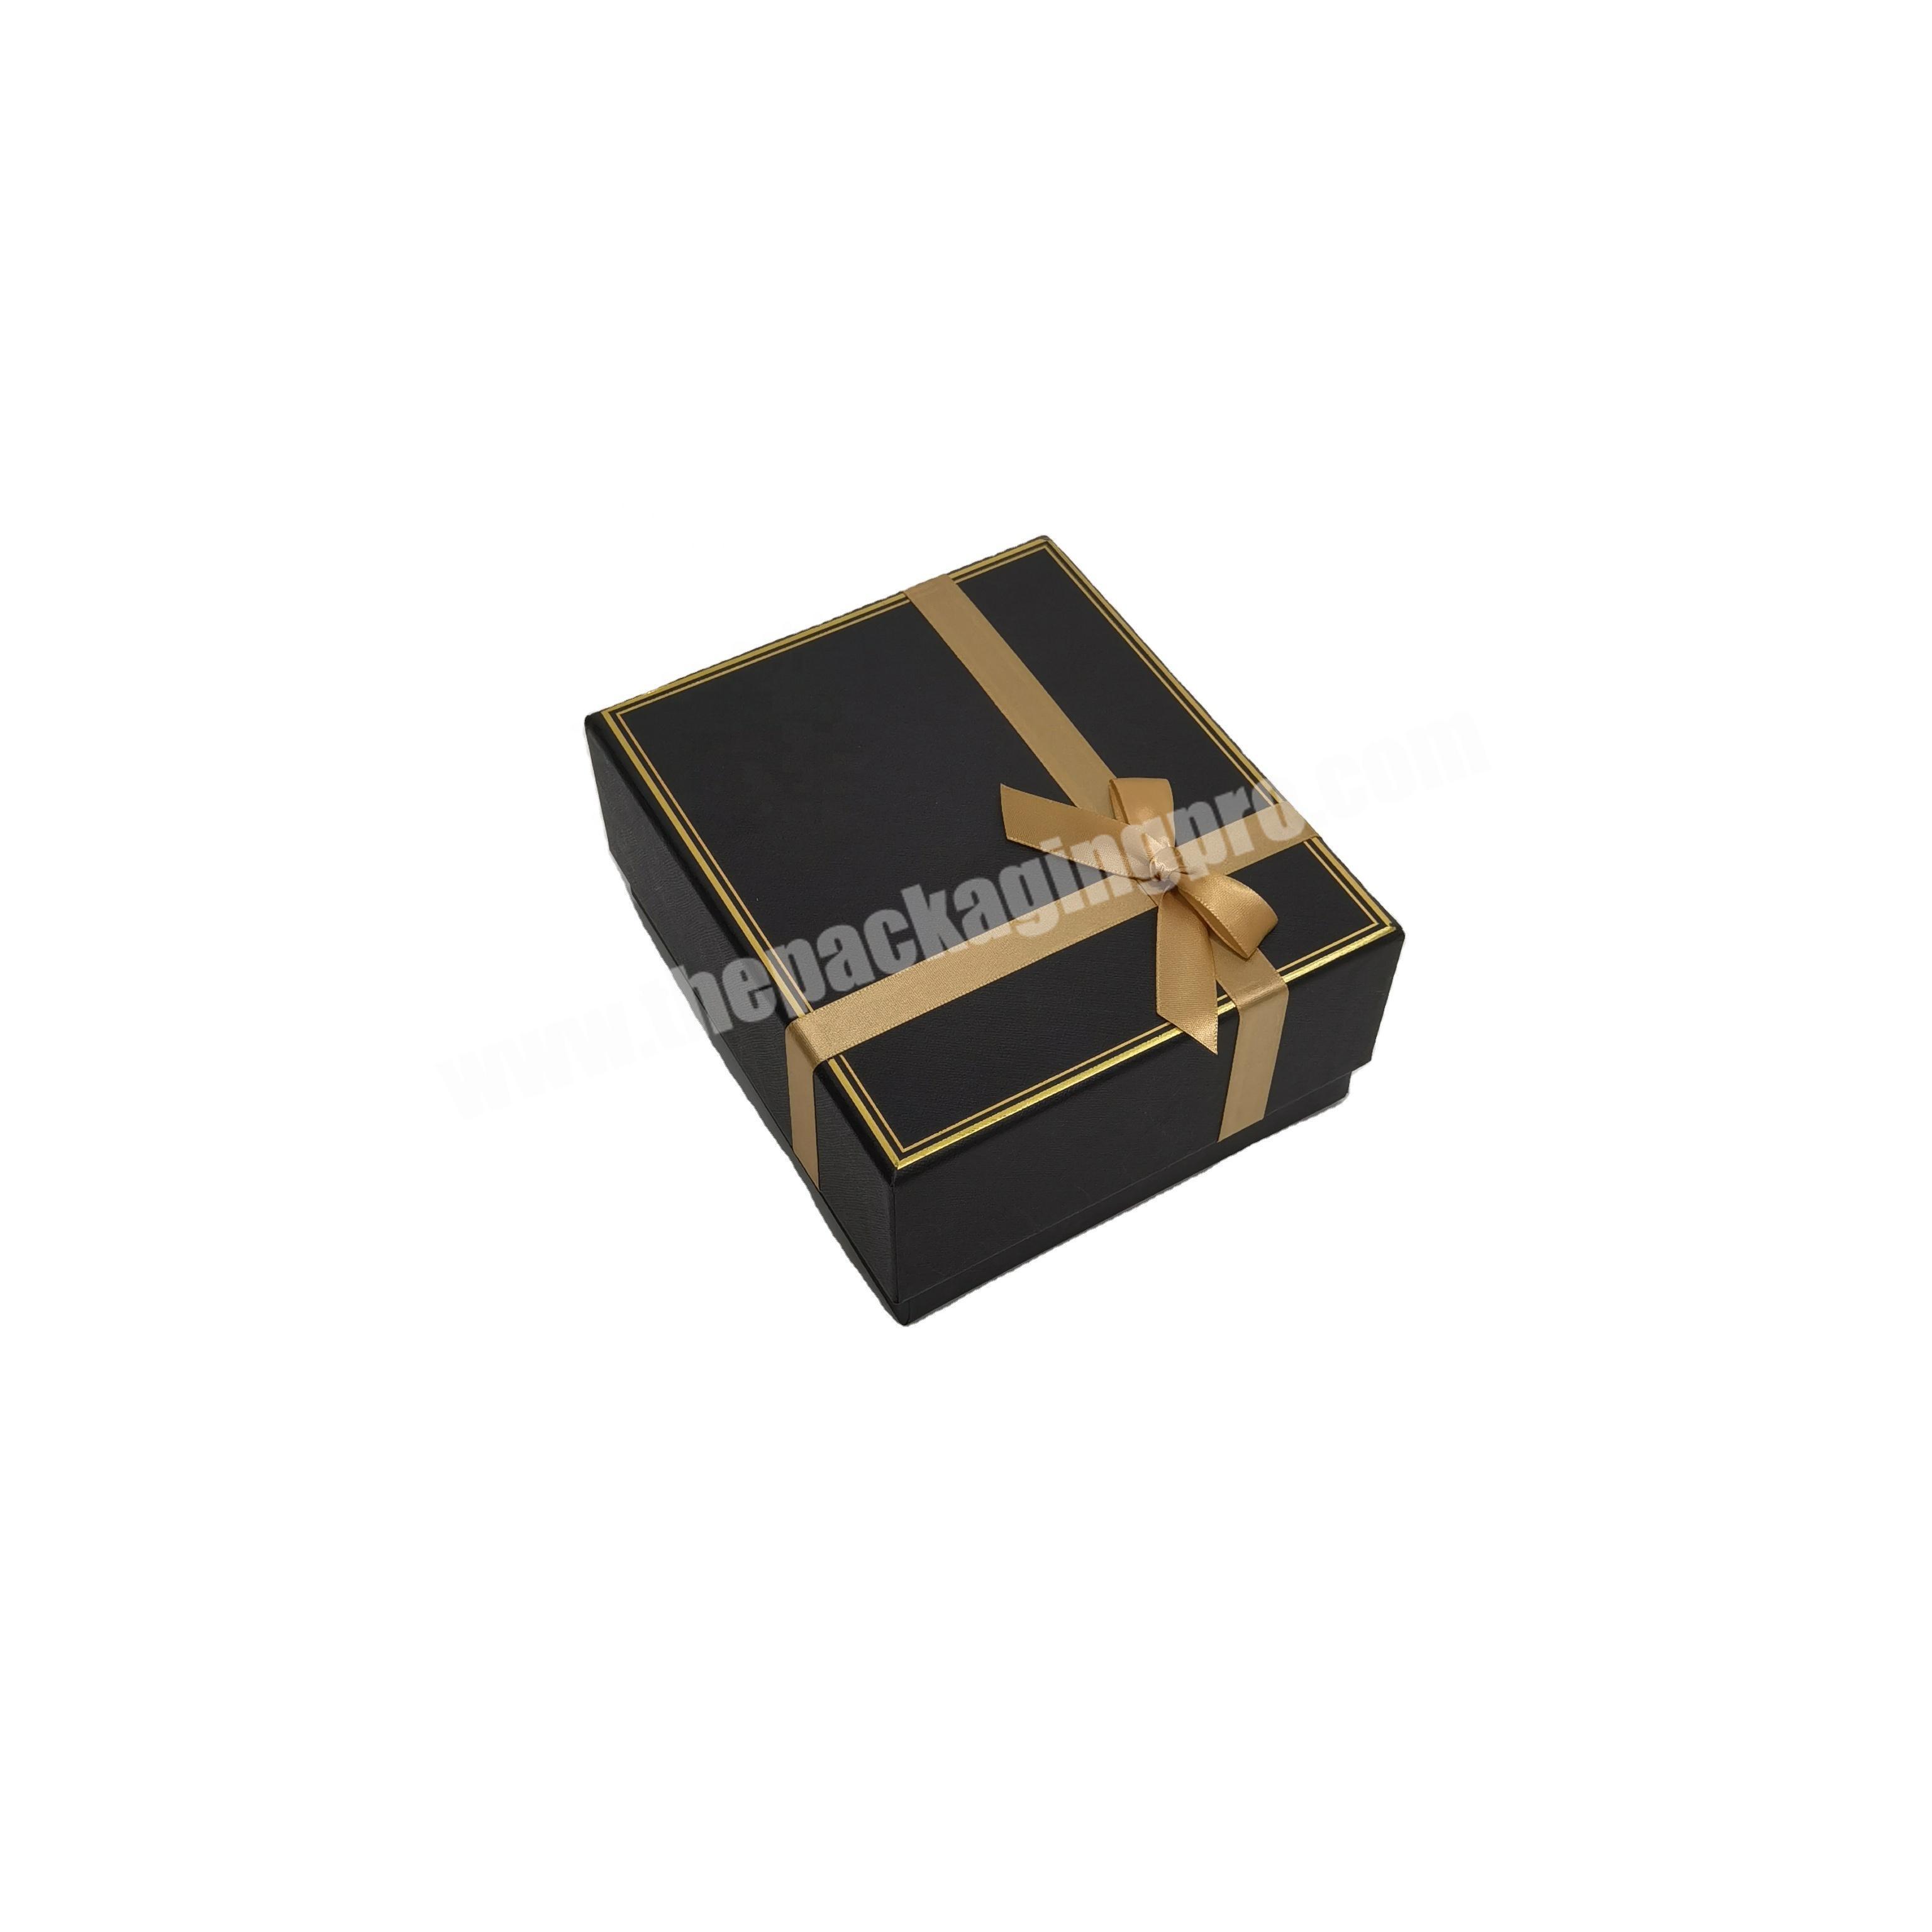 Sumptuous Custom Ribbon Ornaments Environmentally Friendly Exquisite Gift Top Lid Box For Present Packing